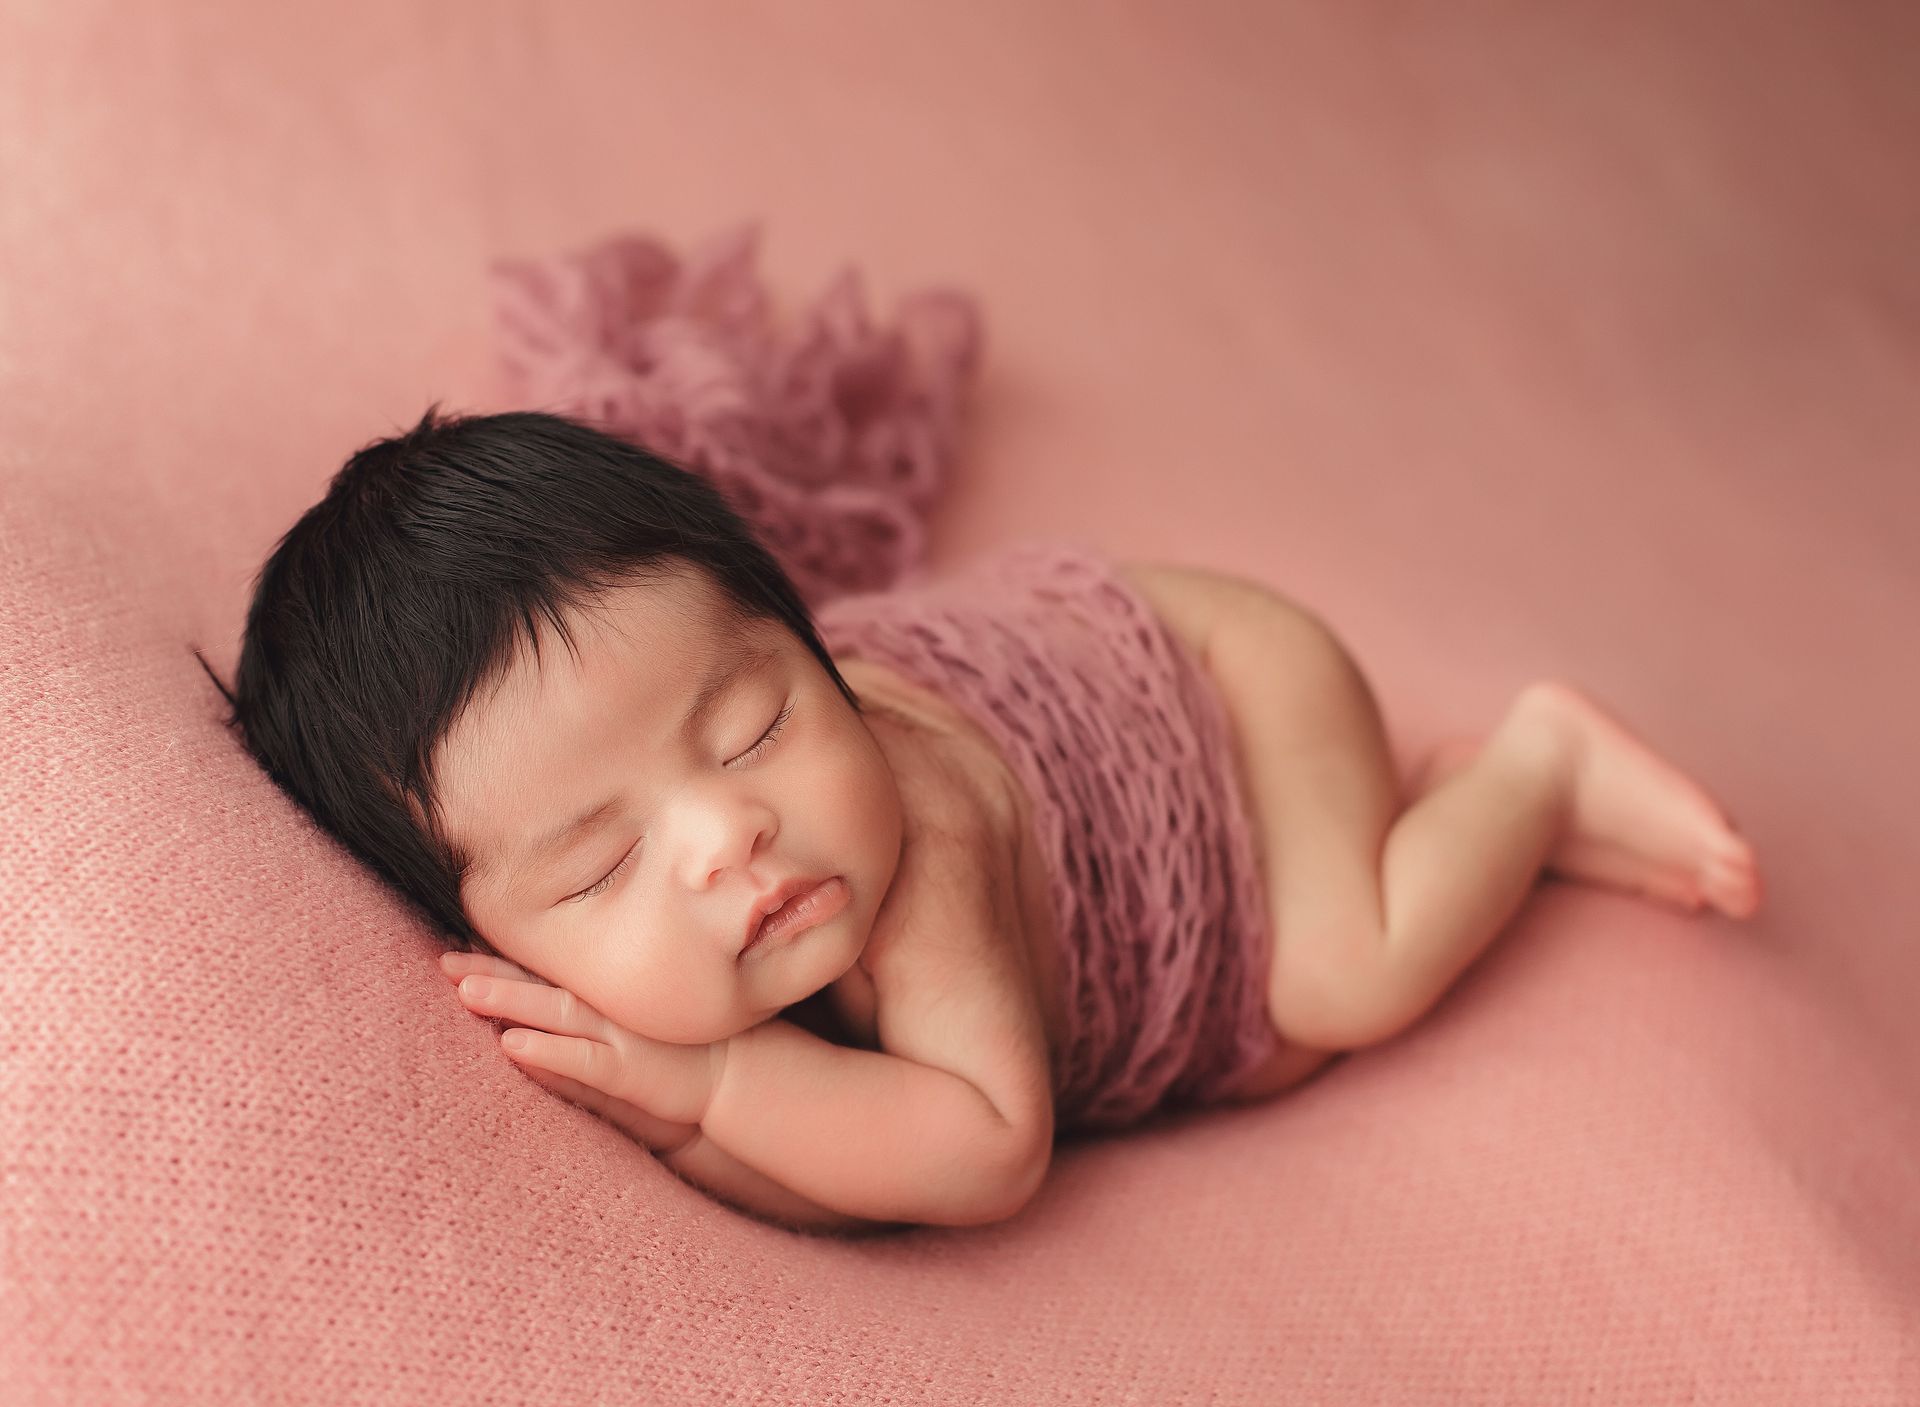 A newborn baby is sleeping on a pink blanket.